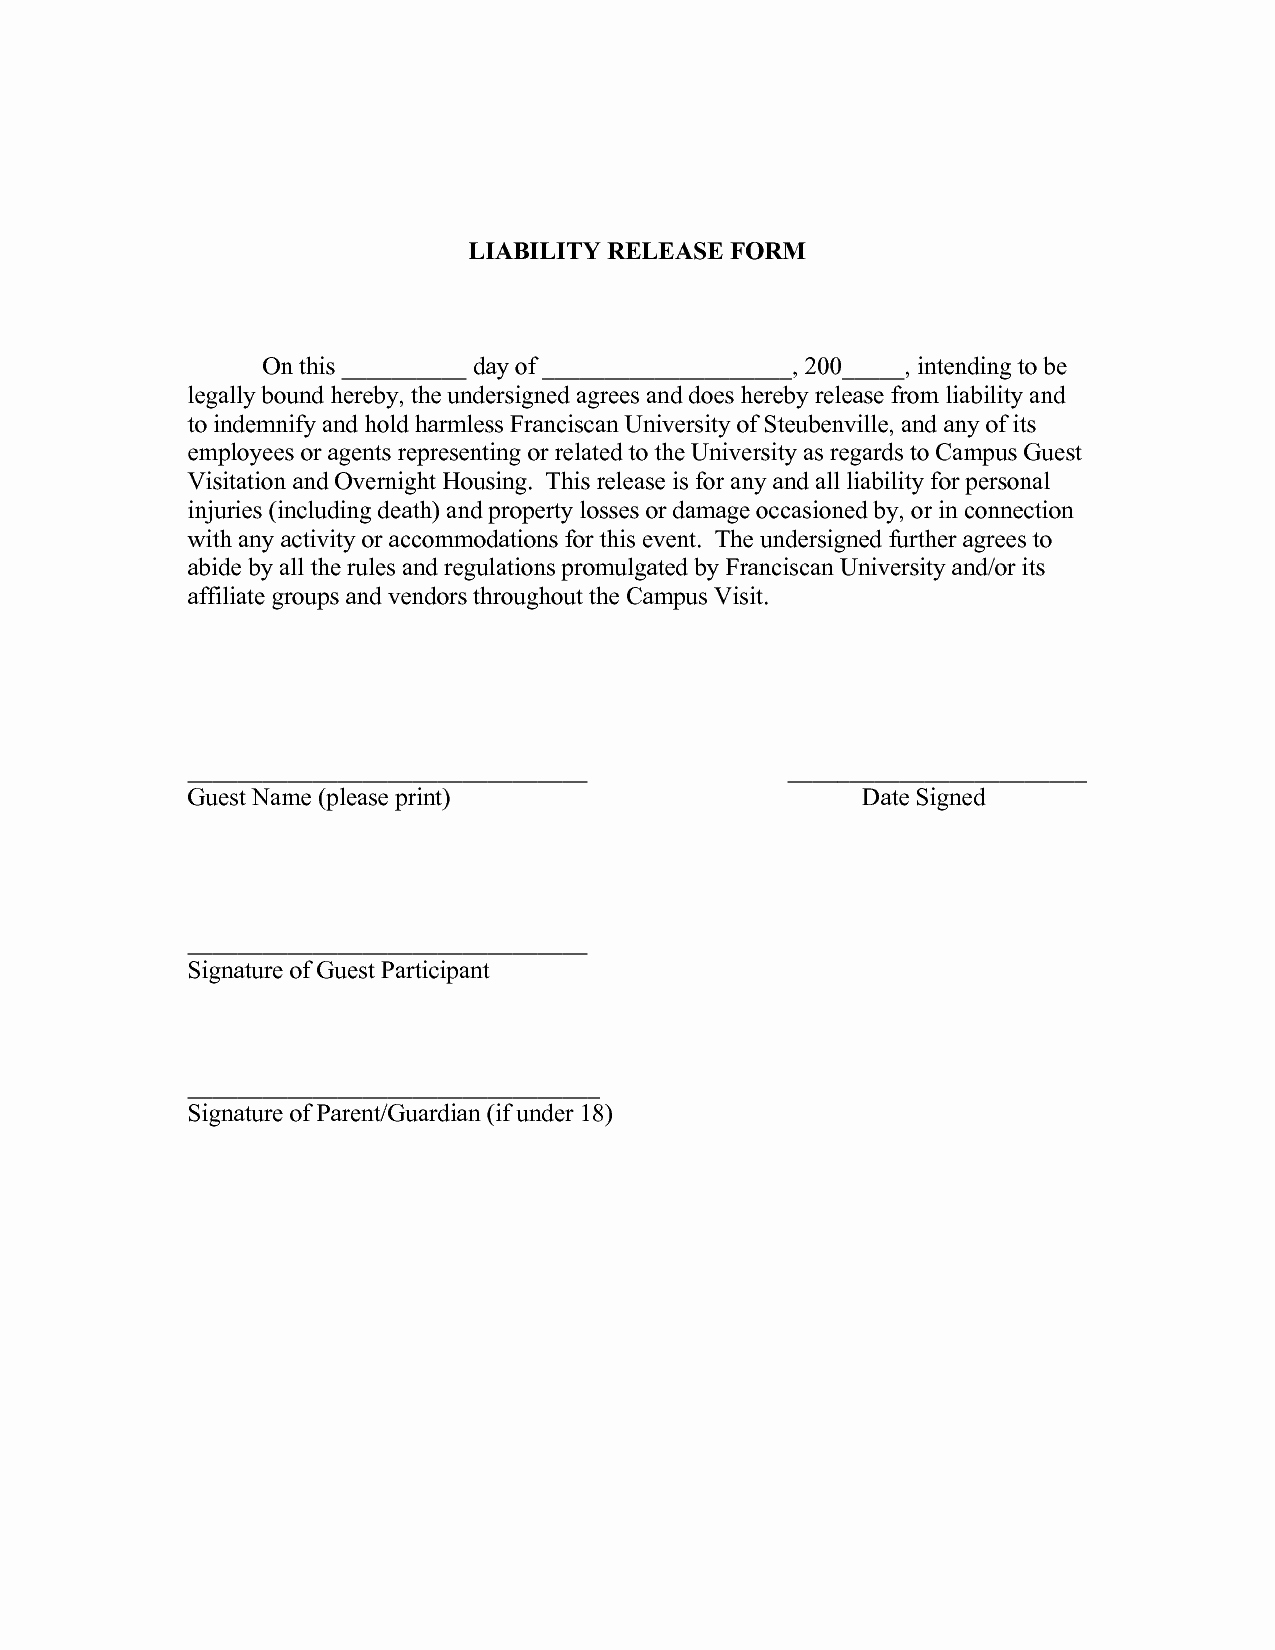 Personal Property Release form Template New Liability Release form Template Free Printable Documents